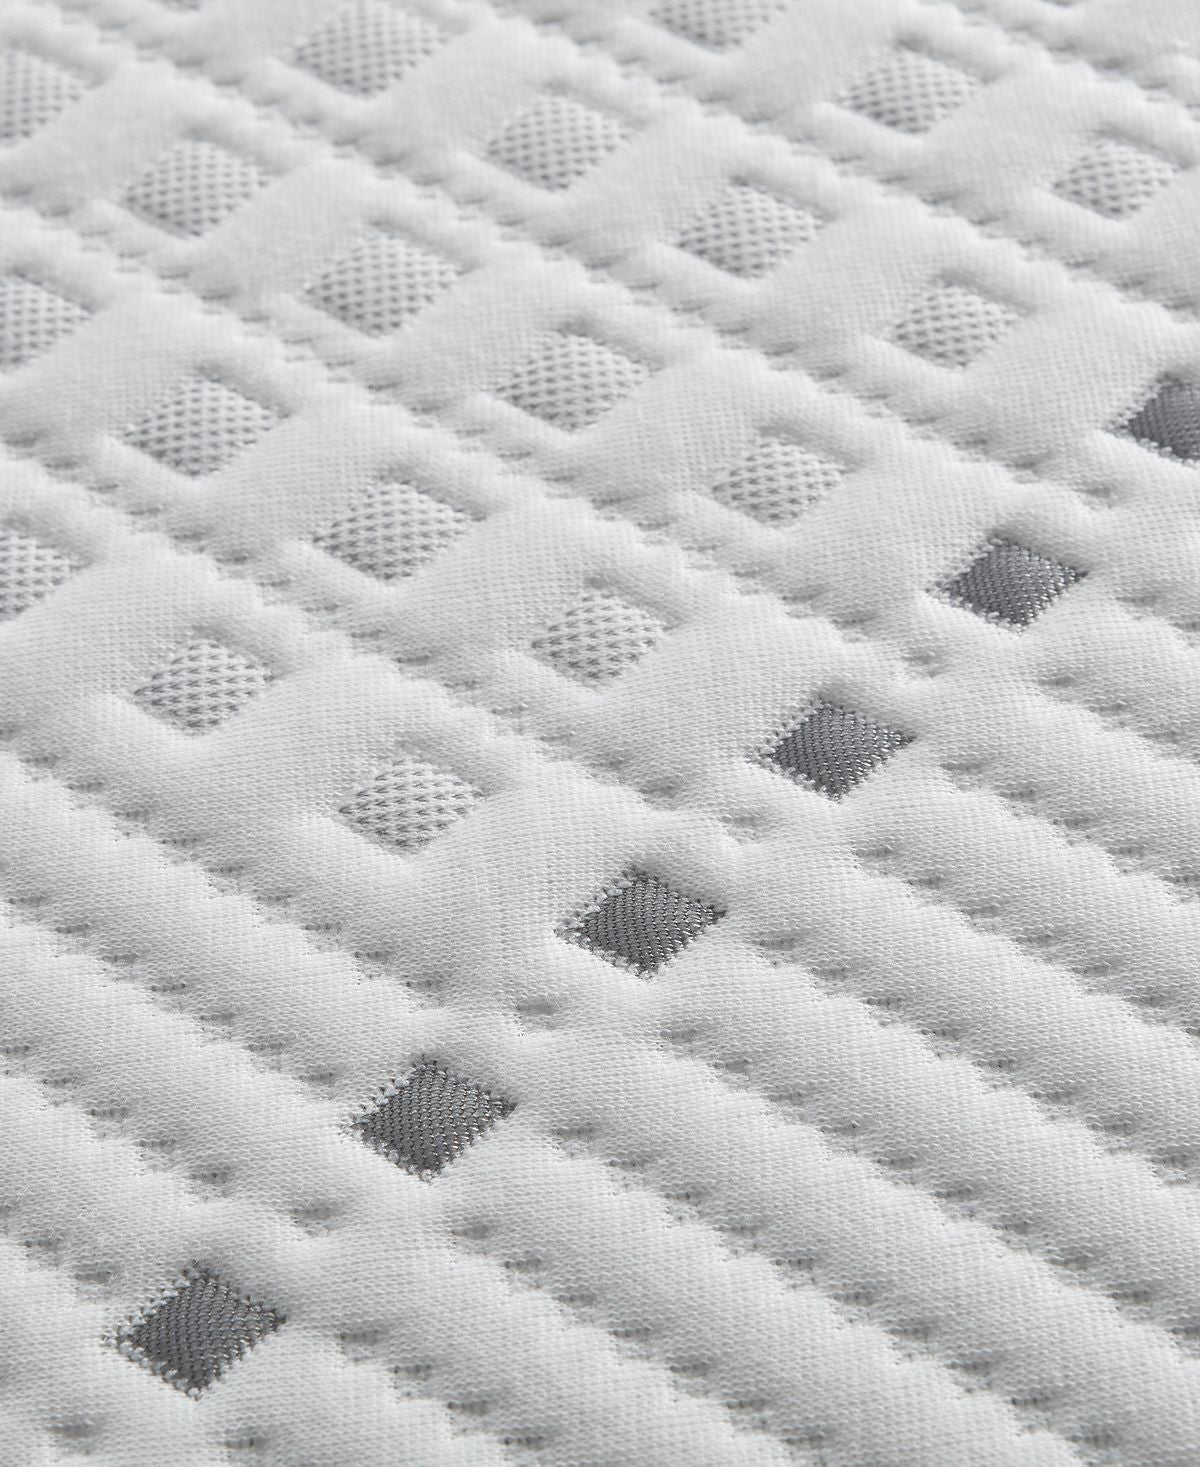 Close-up view of the fabric on a Beautyrest Hybrid BRX1000-IP Plush mattress